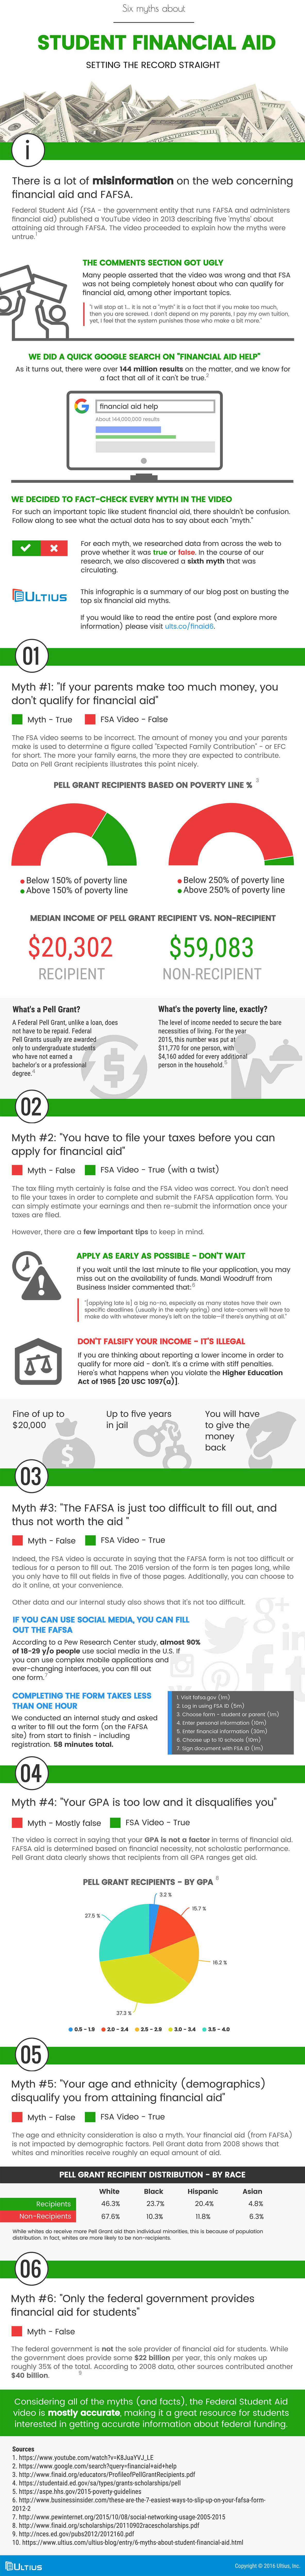 student financial aid infographic